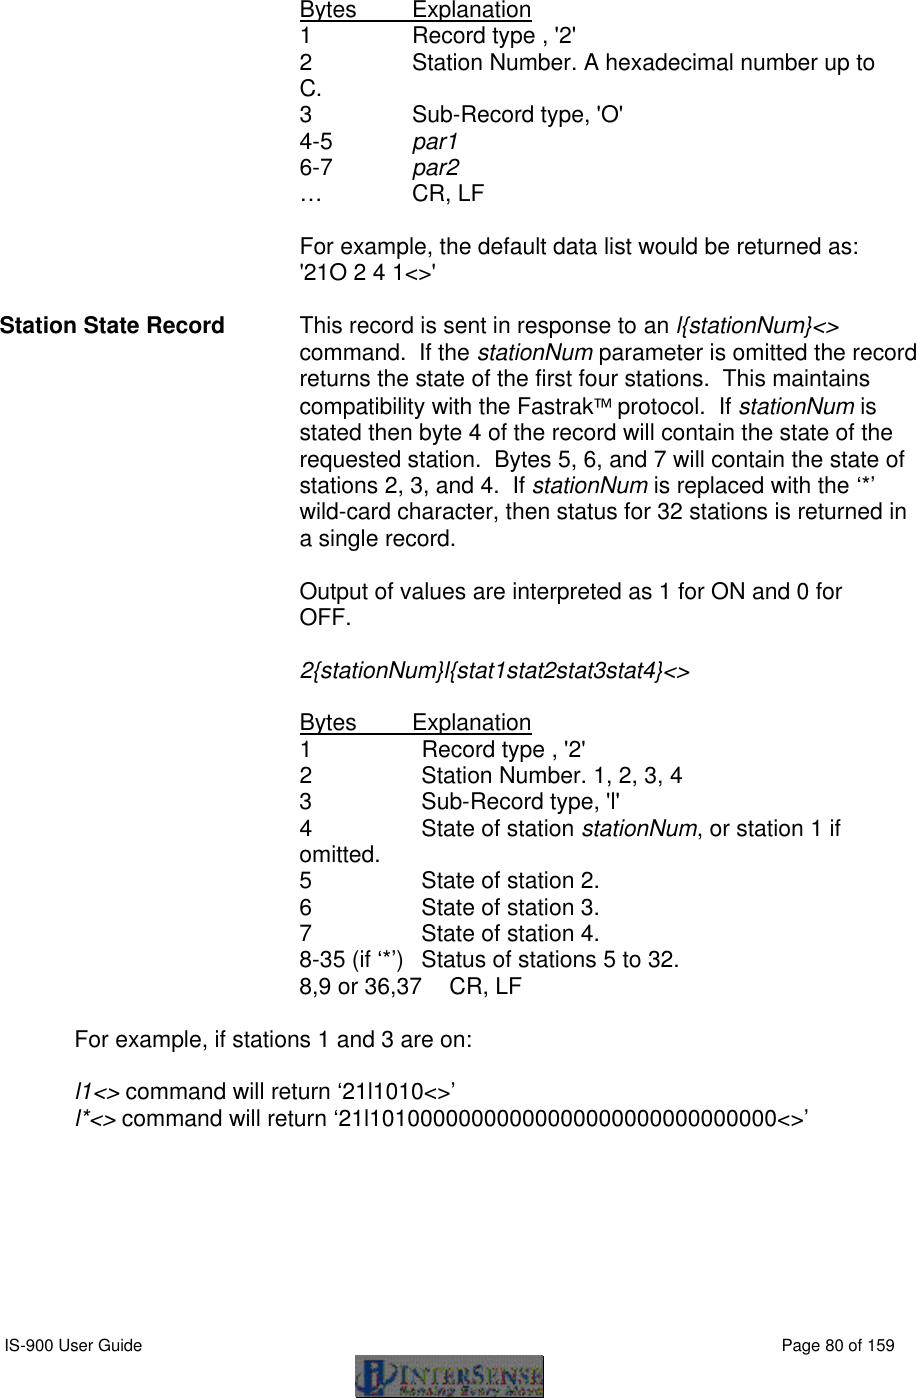  IS-900 User Guide                                                                                                                                          Page 80 of 159   Bytes Explanation 1 Record type , &apos;2&apos; 2 Station Number. A hexadecimal number up to C. 3   Sub-Record type, &apos;O&apos; 4-5 par1 6-7 par2 …   CR, LF    For example, the default data list would be returned as:  &apos;21O 2 4 1&lt;&gt;&apos;  Station State Record This record is sent in response to an l{stationNum}&lt;&gt; command.  If the stationNum parameter is omitted the record returns the state of the first four stations.  This maintains compatibility with the Fastrak protocol.  If stationNum is stated then byte 4 of the record will contain the state of the requested station.  Bytes 5, 6, and 7 will contain the state of stations 2, 3, and 4.  If stationNum is replaced with the ‘*’ wild-card character, then status for 32 stations is returned in a single record.  Output of values are interpreted as 1 for ON and 0 for OFF.    2{stationNum}l{stat1stat2stat3stat4}&lt;&gt;  Bytes Explanation 1 Record type , &apos;2&apos; 2 Station Number. 1, 2, 3, 4 3   Sub-Record type, &apos;l&apos; 4 State of station stationNum, or station 1 if omitted. 5 State of station 2.  6 State of station 3.  7 State of station 4.  8-35 (if ‘*’) Status of stations 5 to 32. 8,9 or 36,37 CR, LF  For example, if stations 1 and 3 are on:  l1&lt;&gt; command will return ‘21l1010&lt;&gt;’ l*&lt;&gt; command will return ‘21l10100000000000000000000000000000&lt;&gt;’  